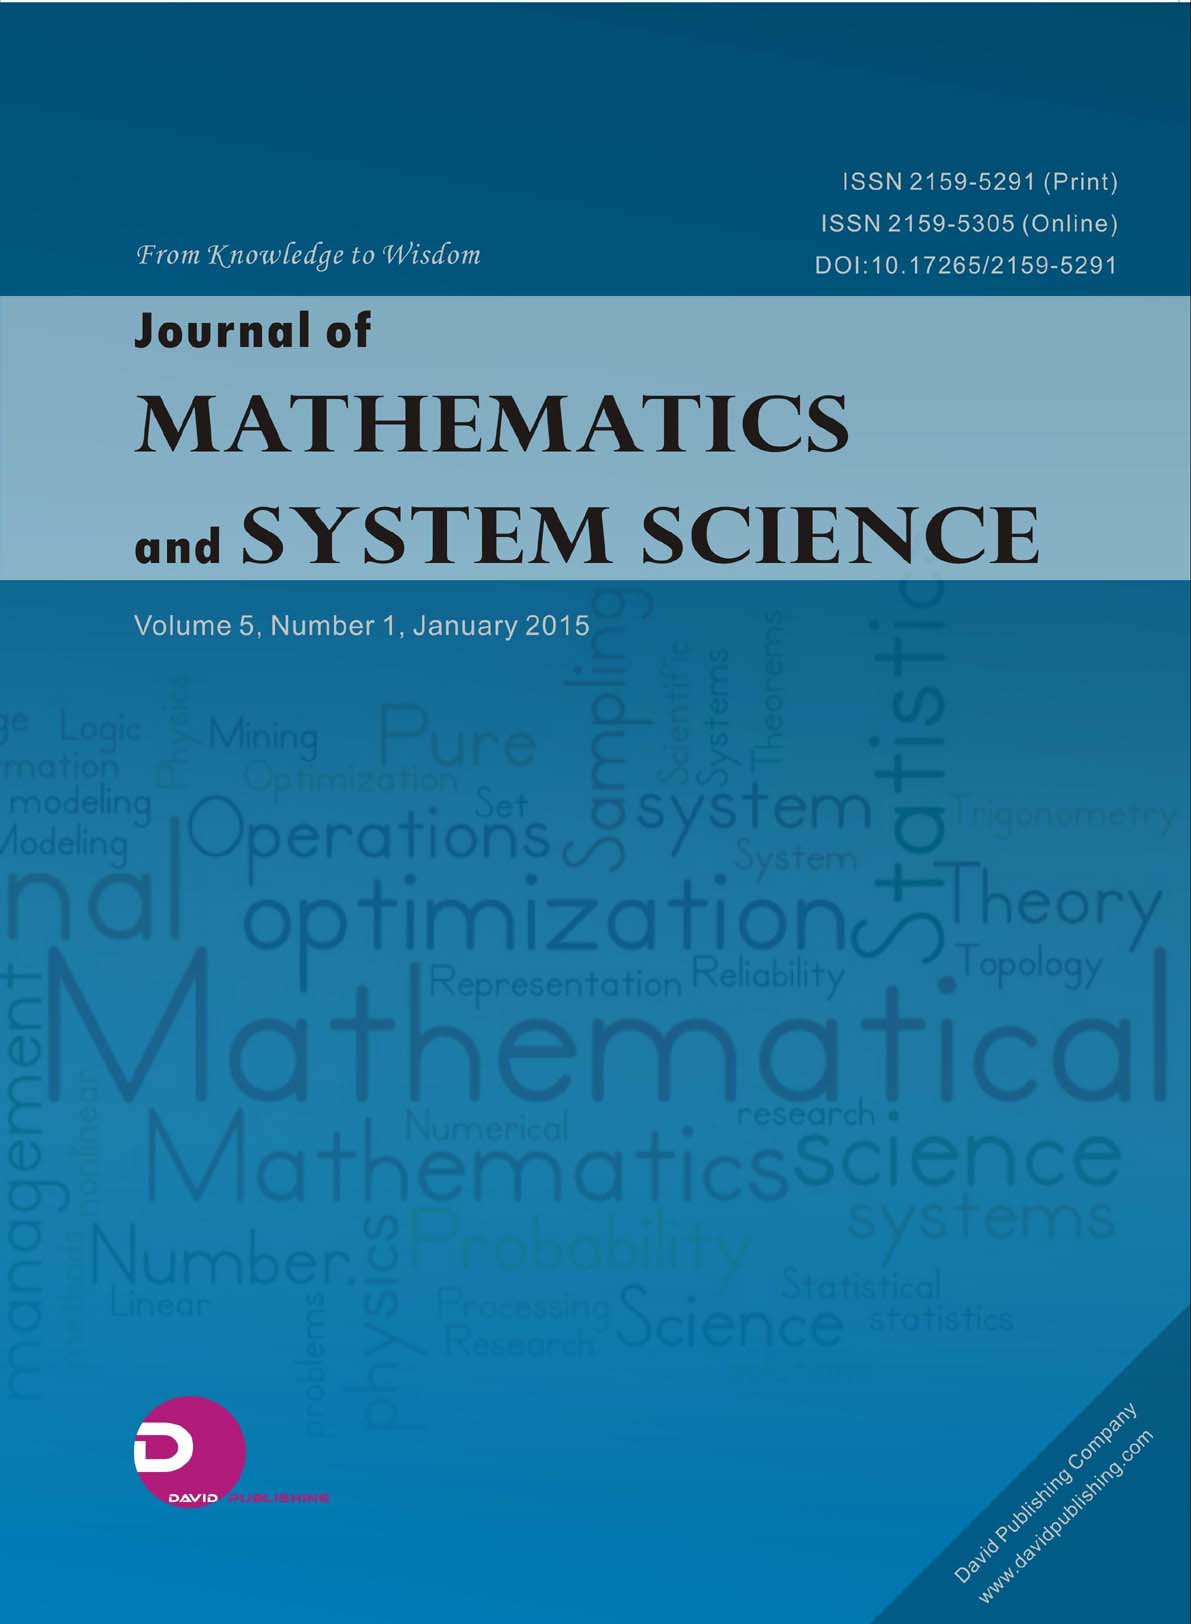 Journal of Mathematics and System Science